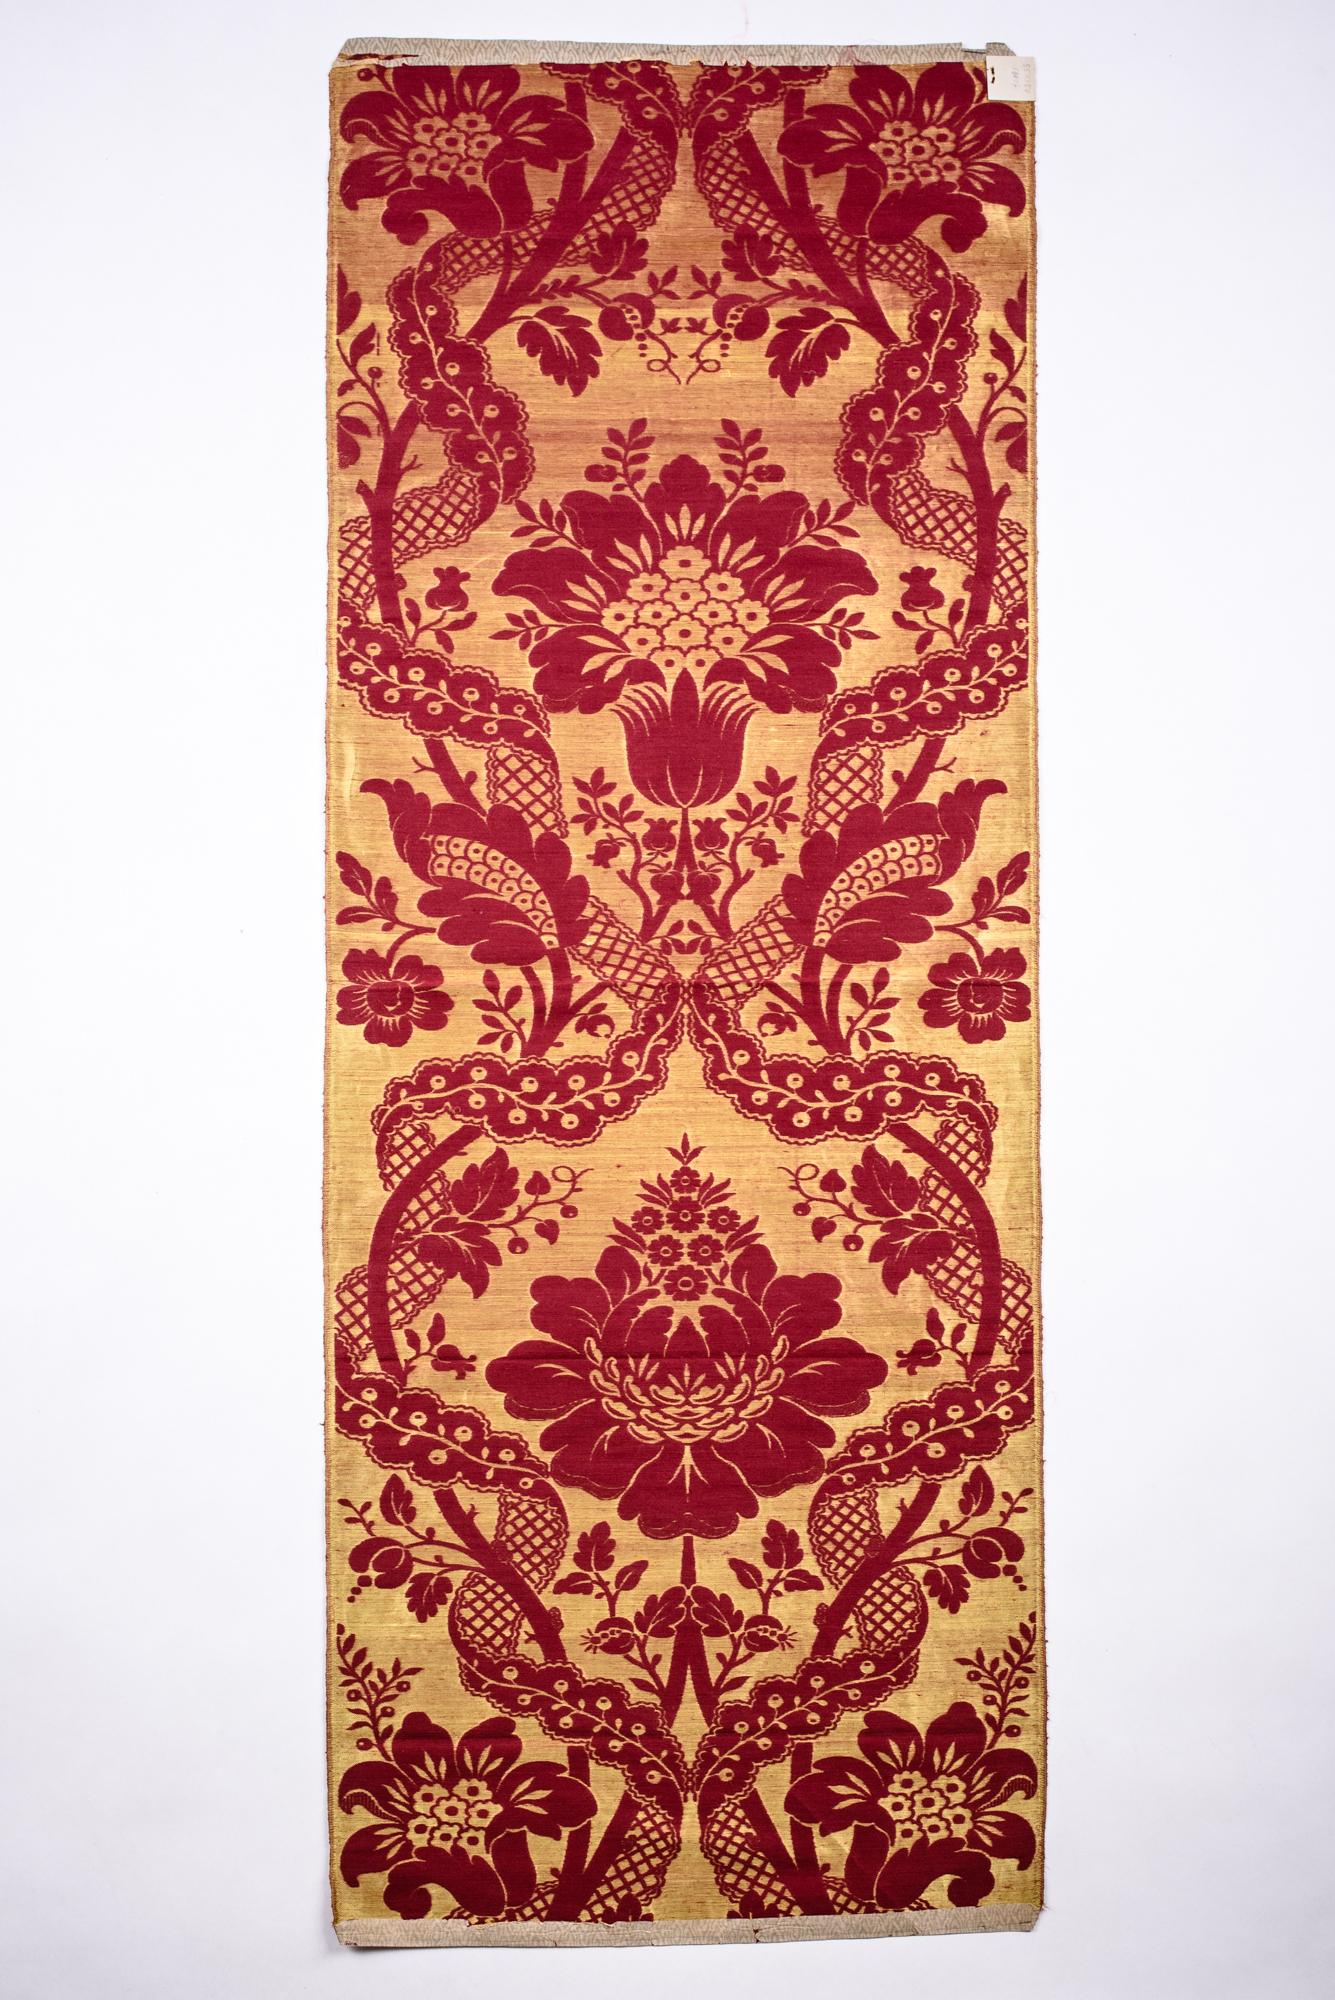 Circa 1870-1880
France

Beautiful silk lampas with a cherry and golden yellow Grand décor decoration in the taste of the designer Arthur Martin. A presentation leaf complete with its selvedges on a cherry satin background and flowers on a golden